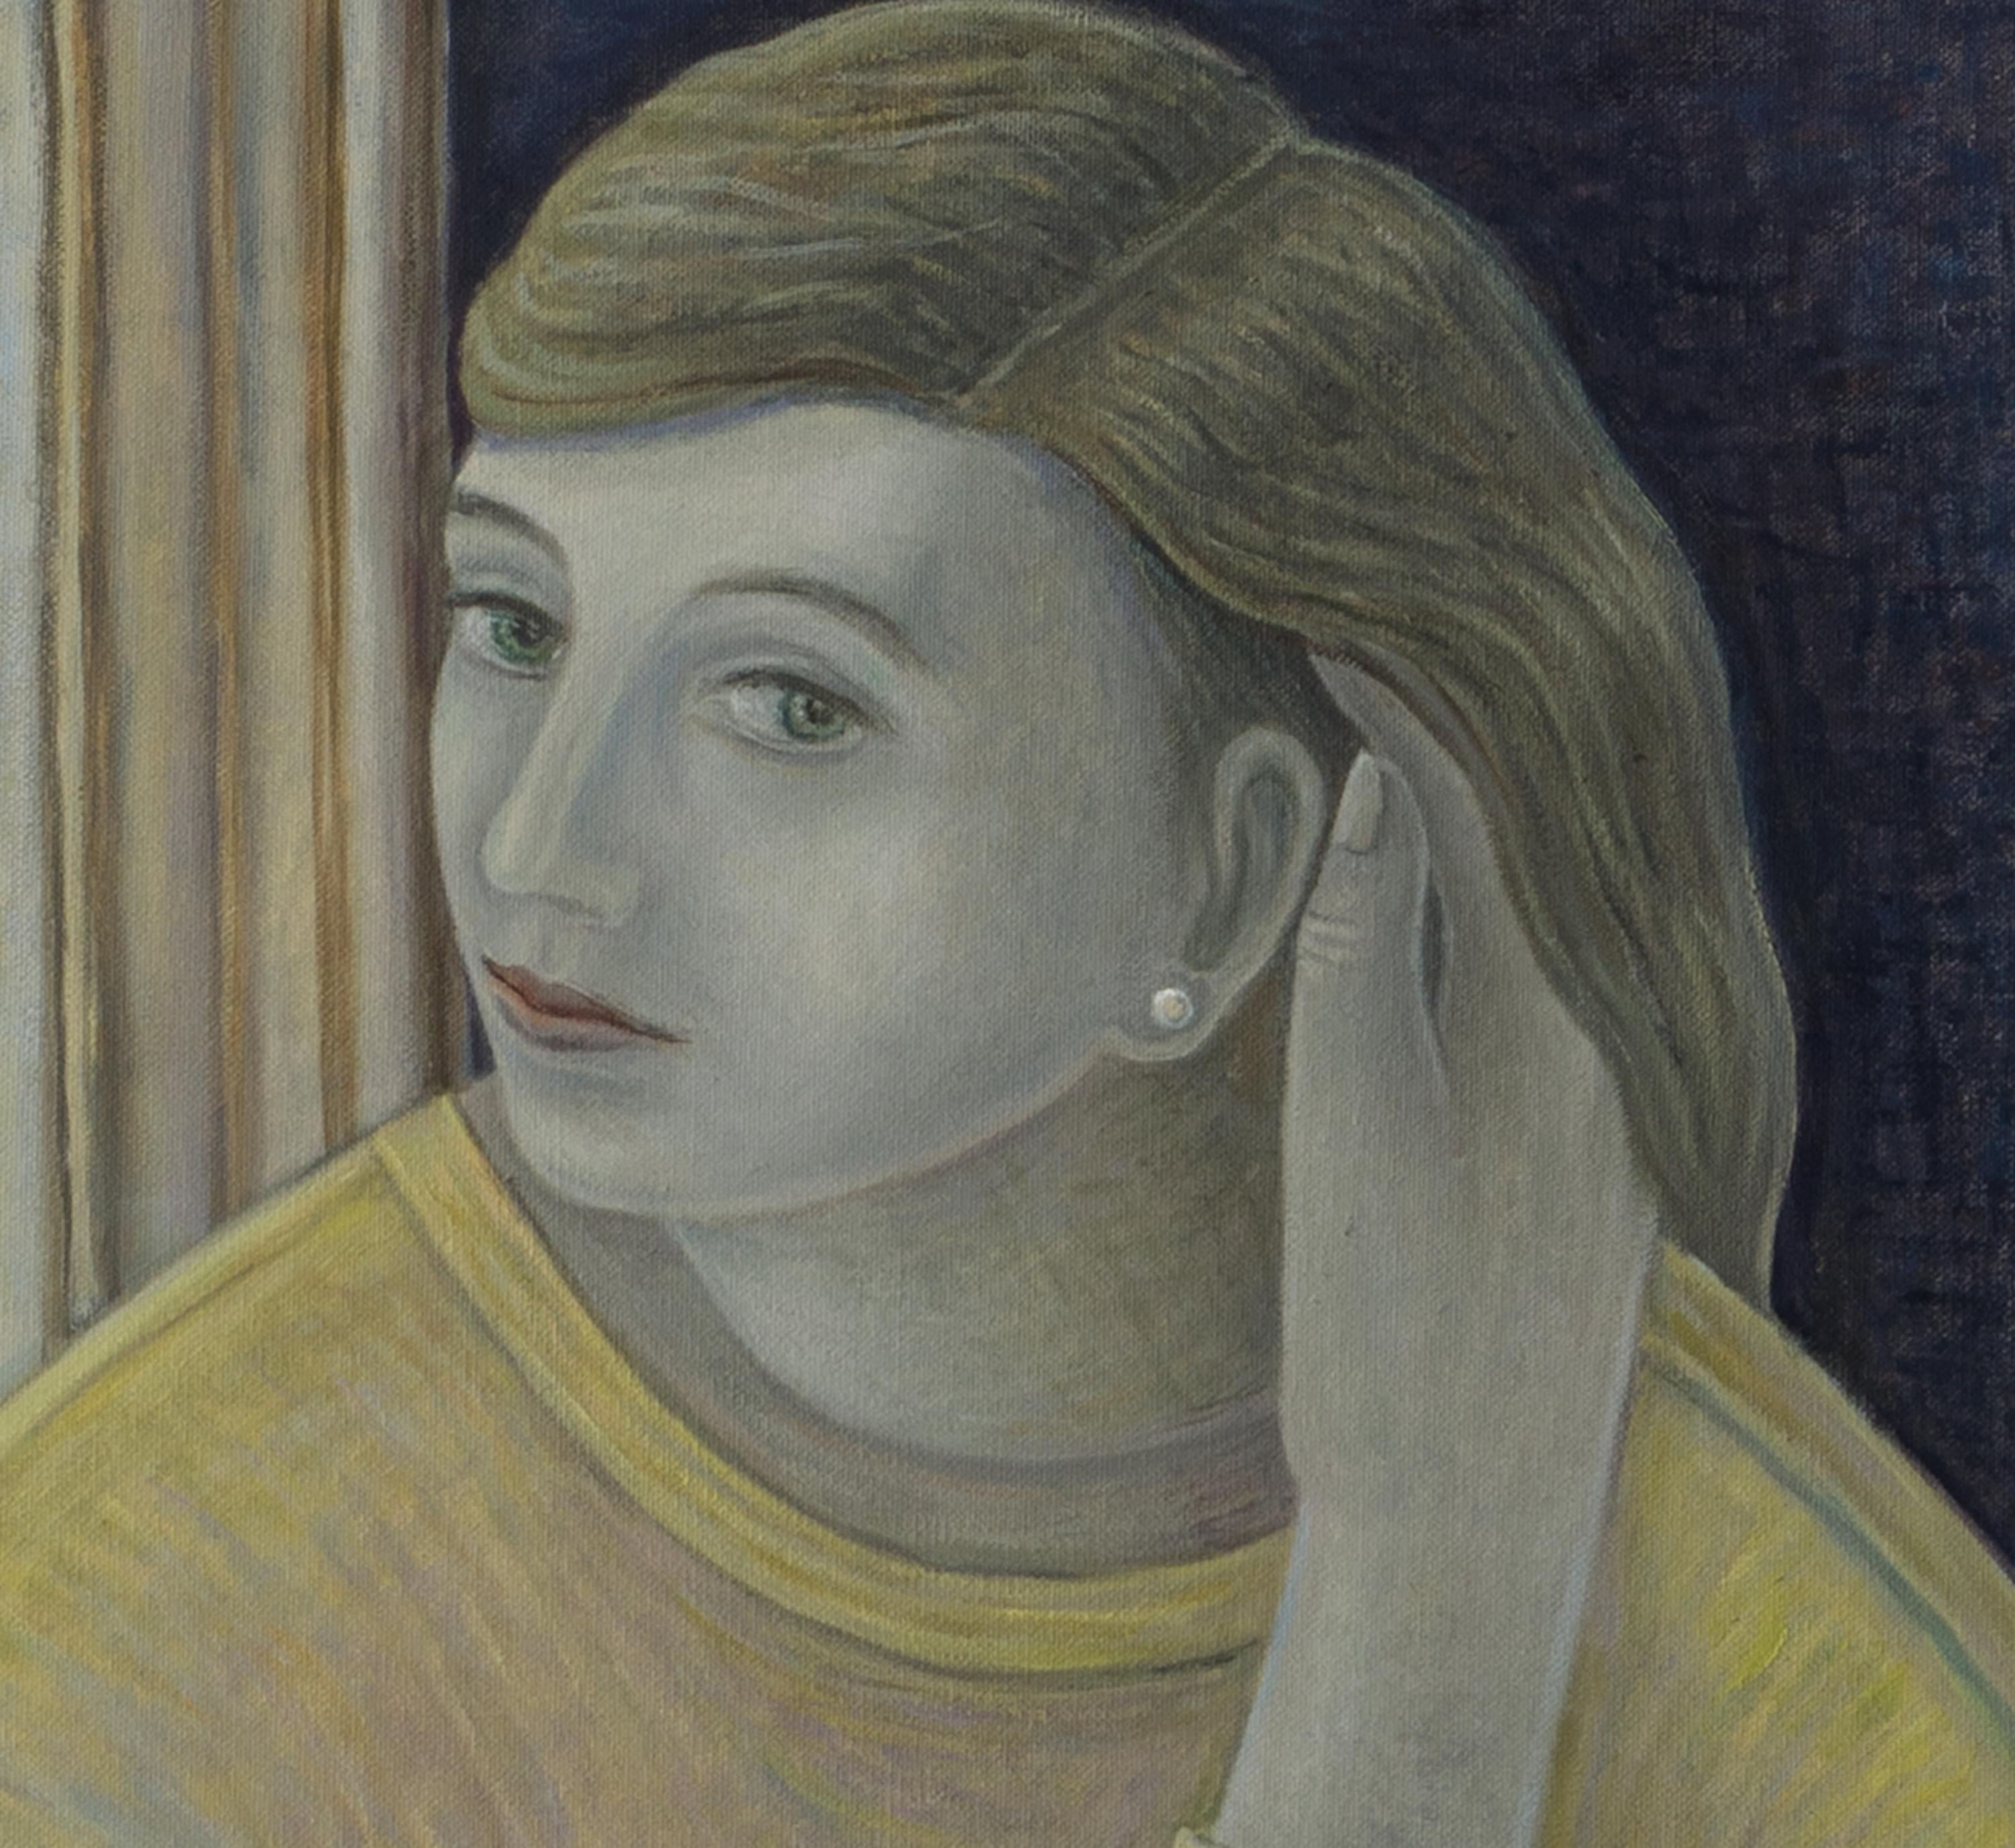 Much vaunted Scottish artist Ruth Addinall is well recognised for her paintings of women, her characters form strong pieces that also reflect a more gentle aspect. Her subject is a thoroughly modern girl, however there are allusions to a more